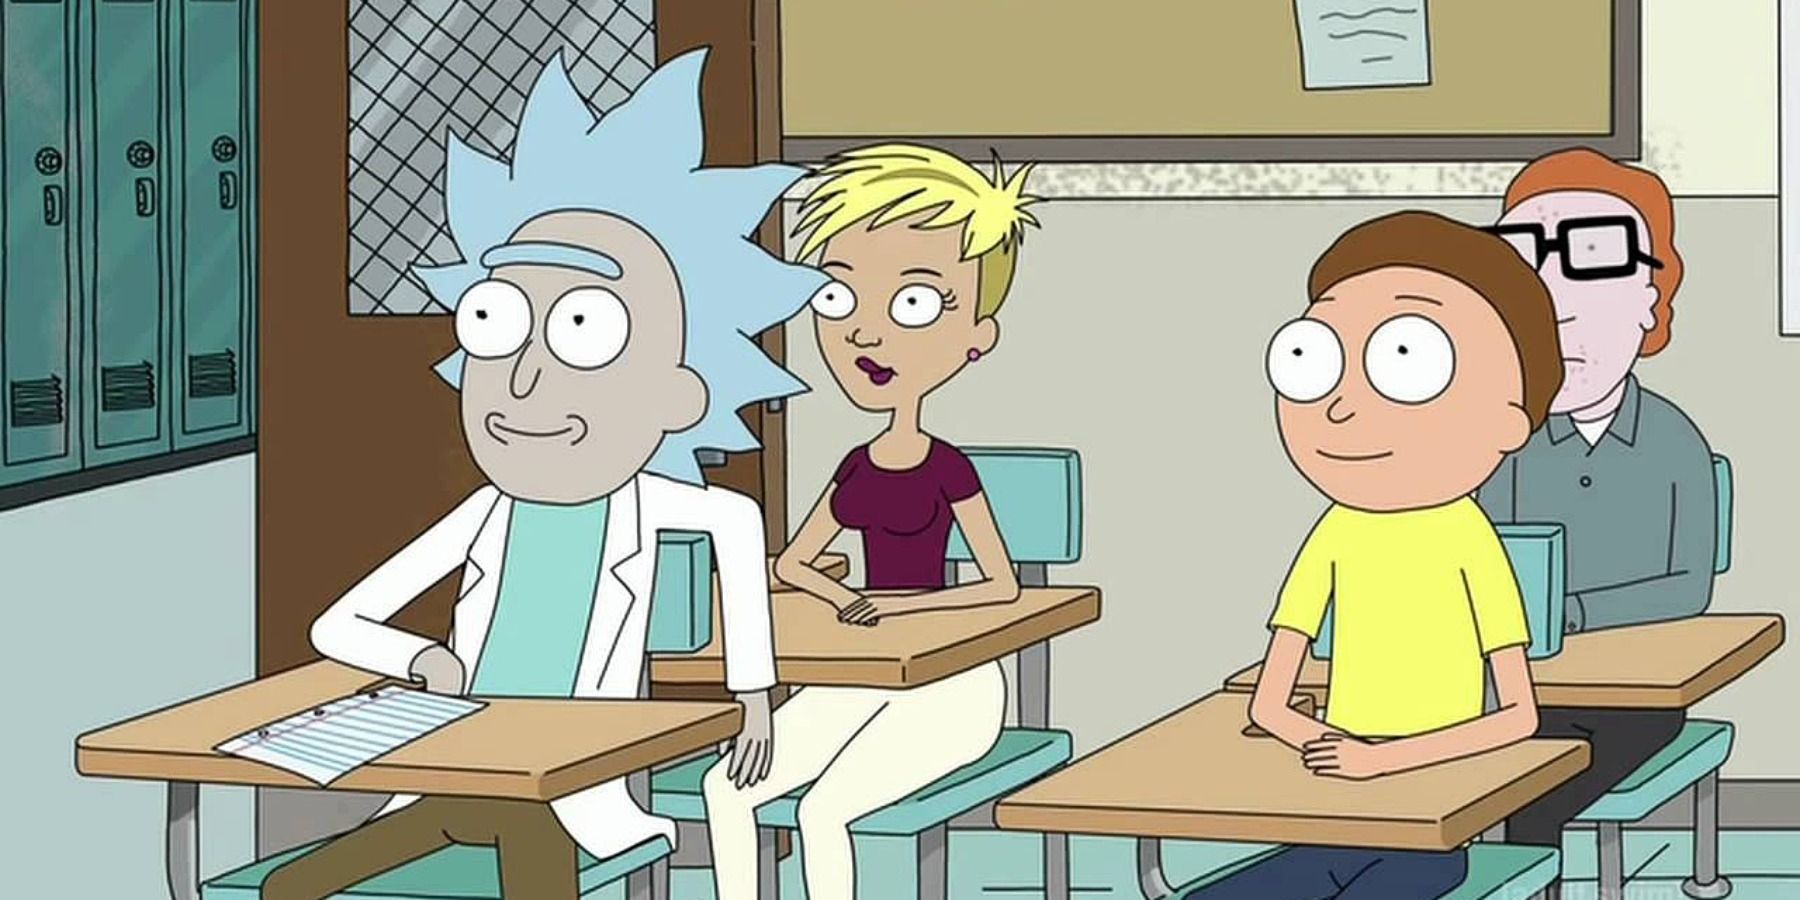 Tiny Rick and Morty in classroom